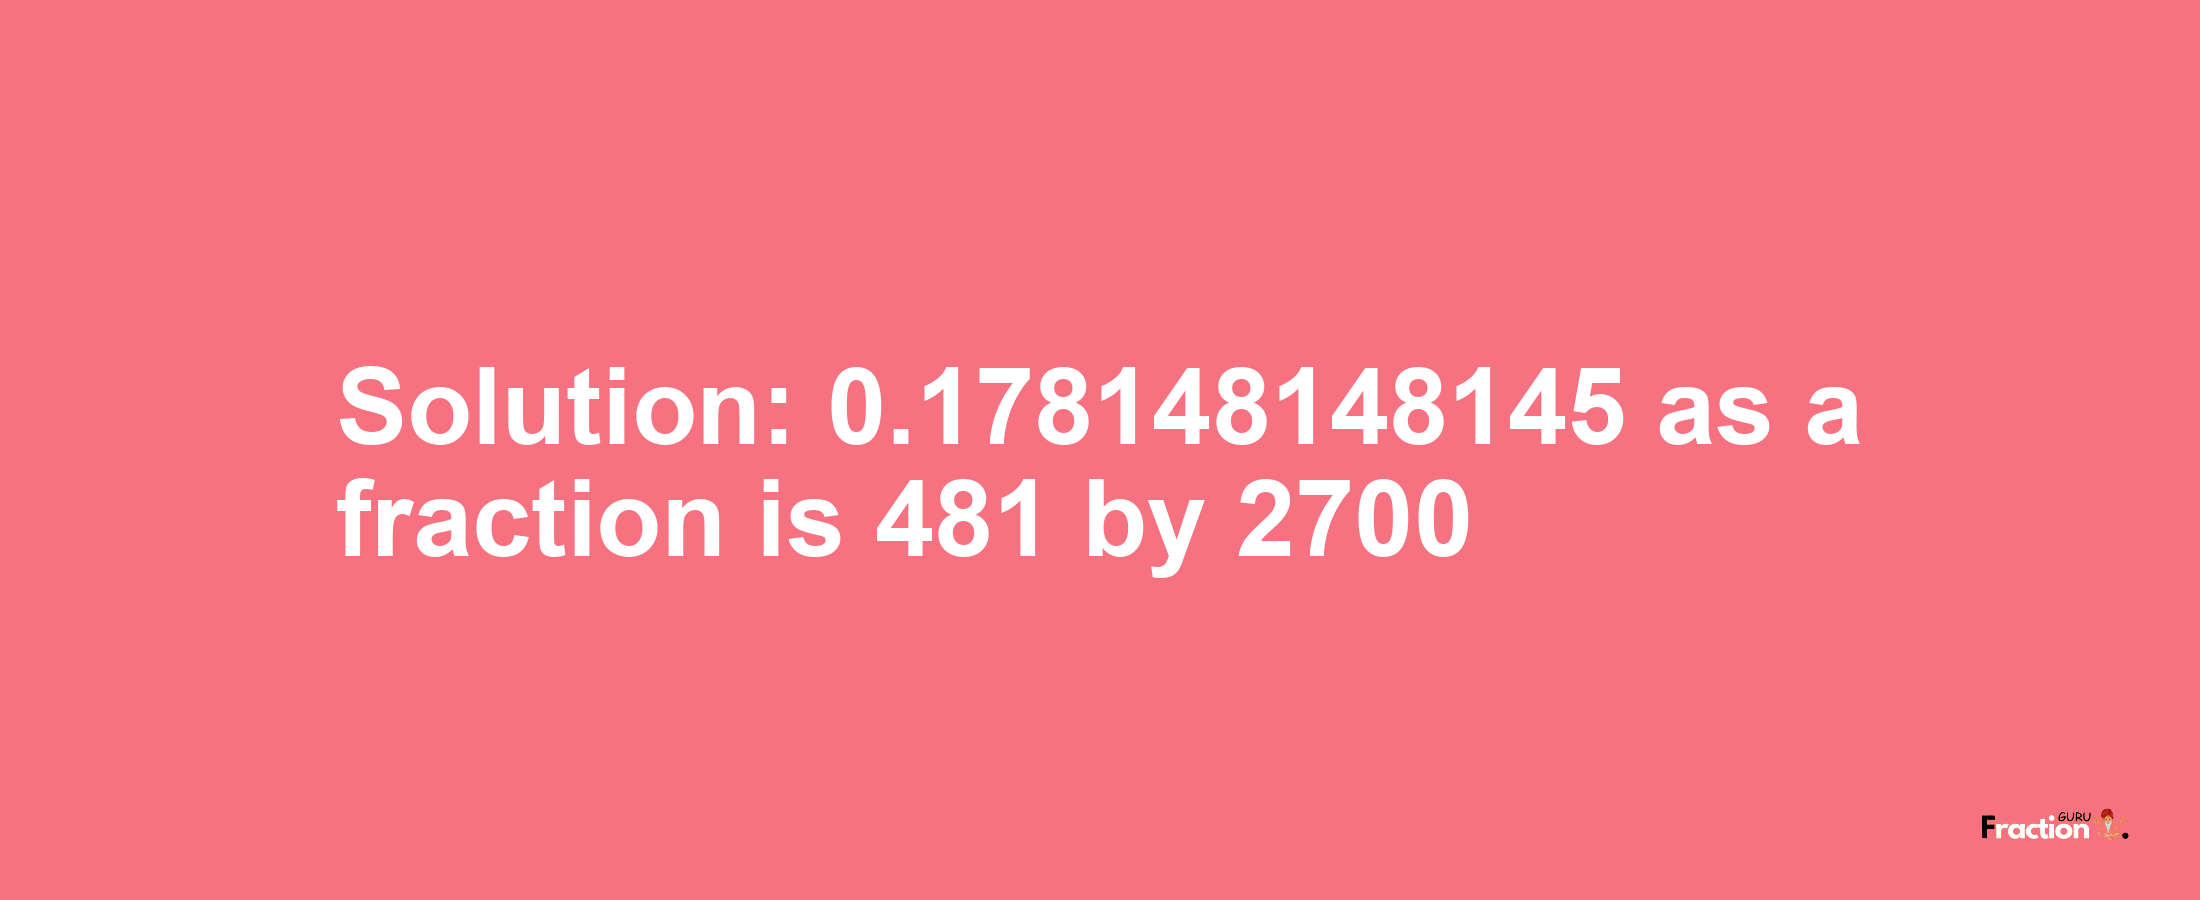 Solution:0.178148148145 as a fraction is 481/2700